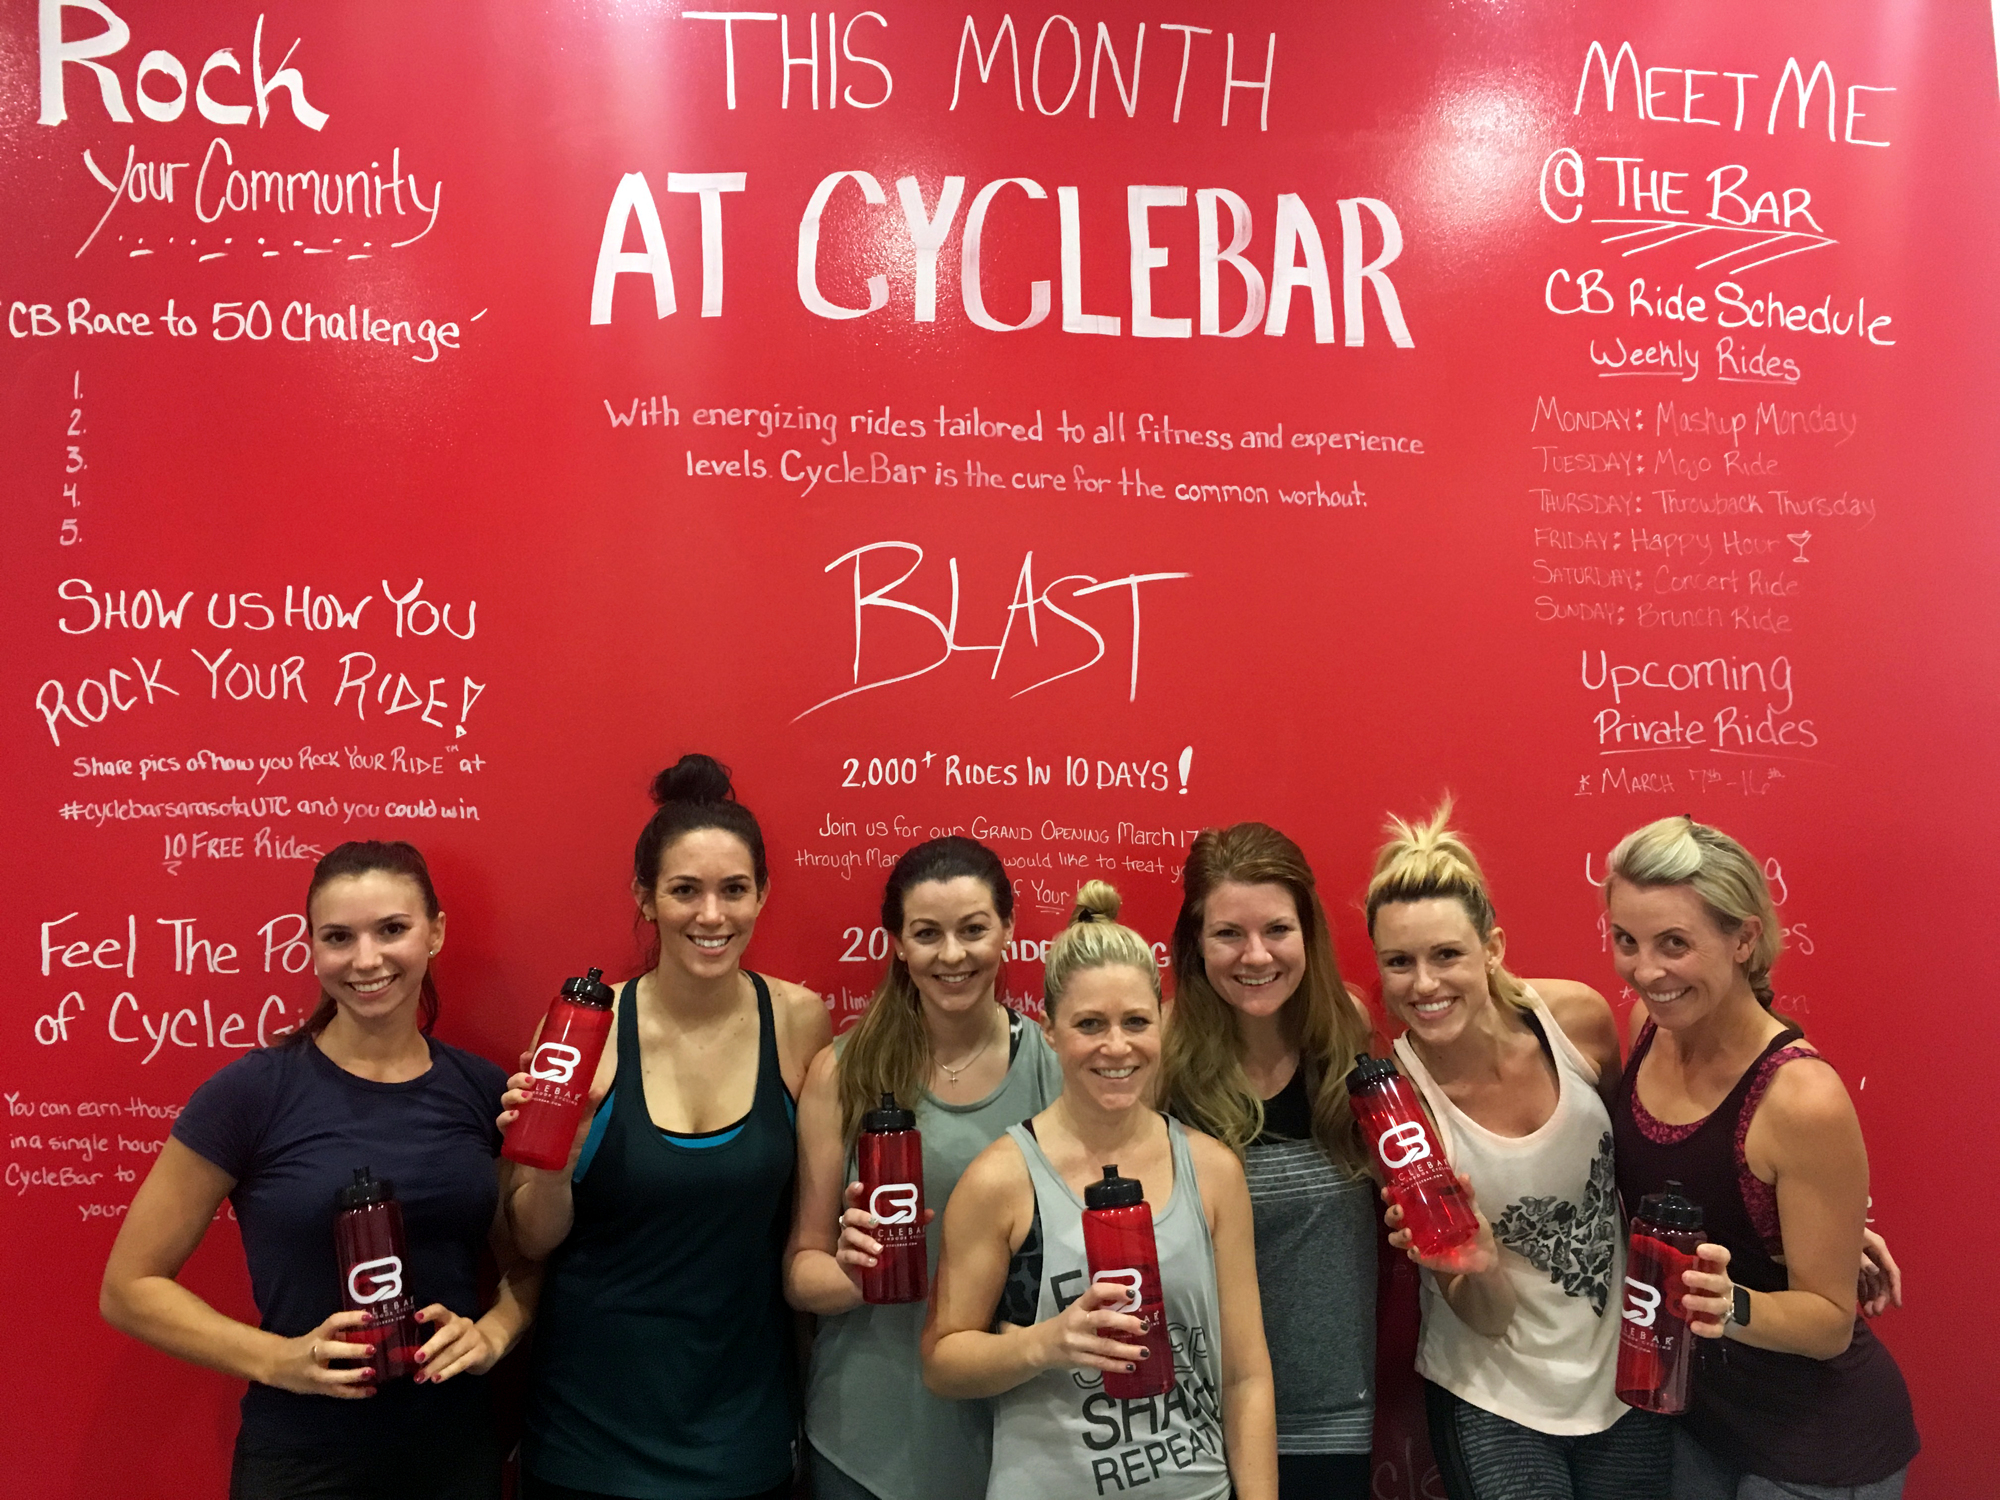 Designing Daughters and our own BT Editor try out Cycle Bar March 7. Through its CycleGiving program, Cycle Bar partners with charities to help raise donations.